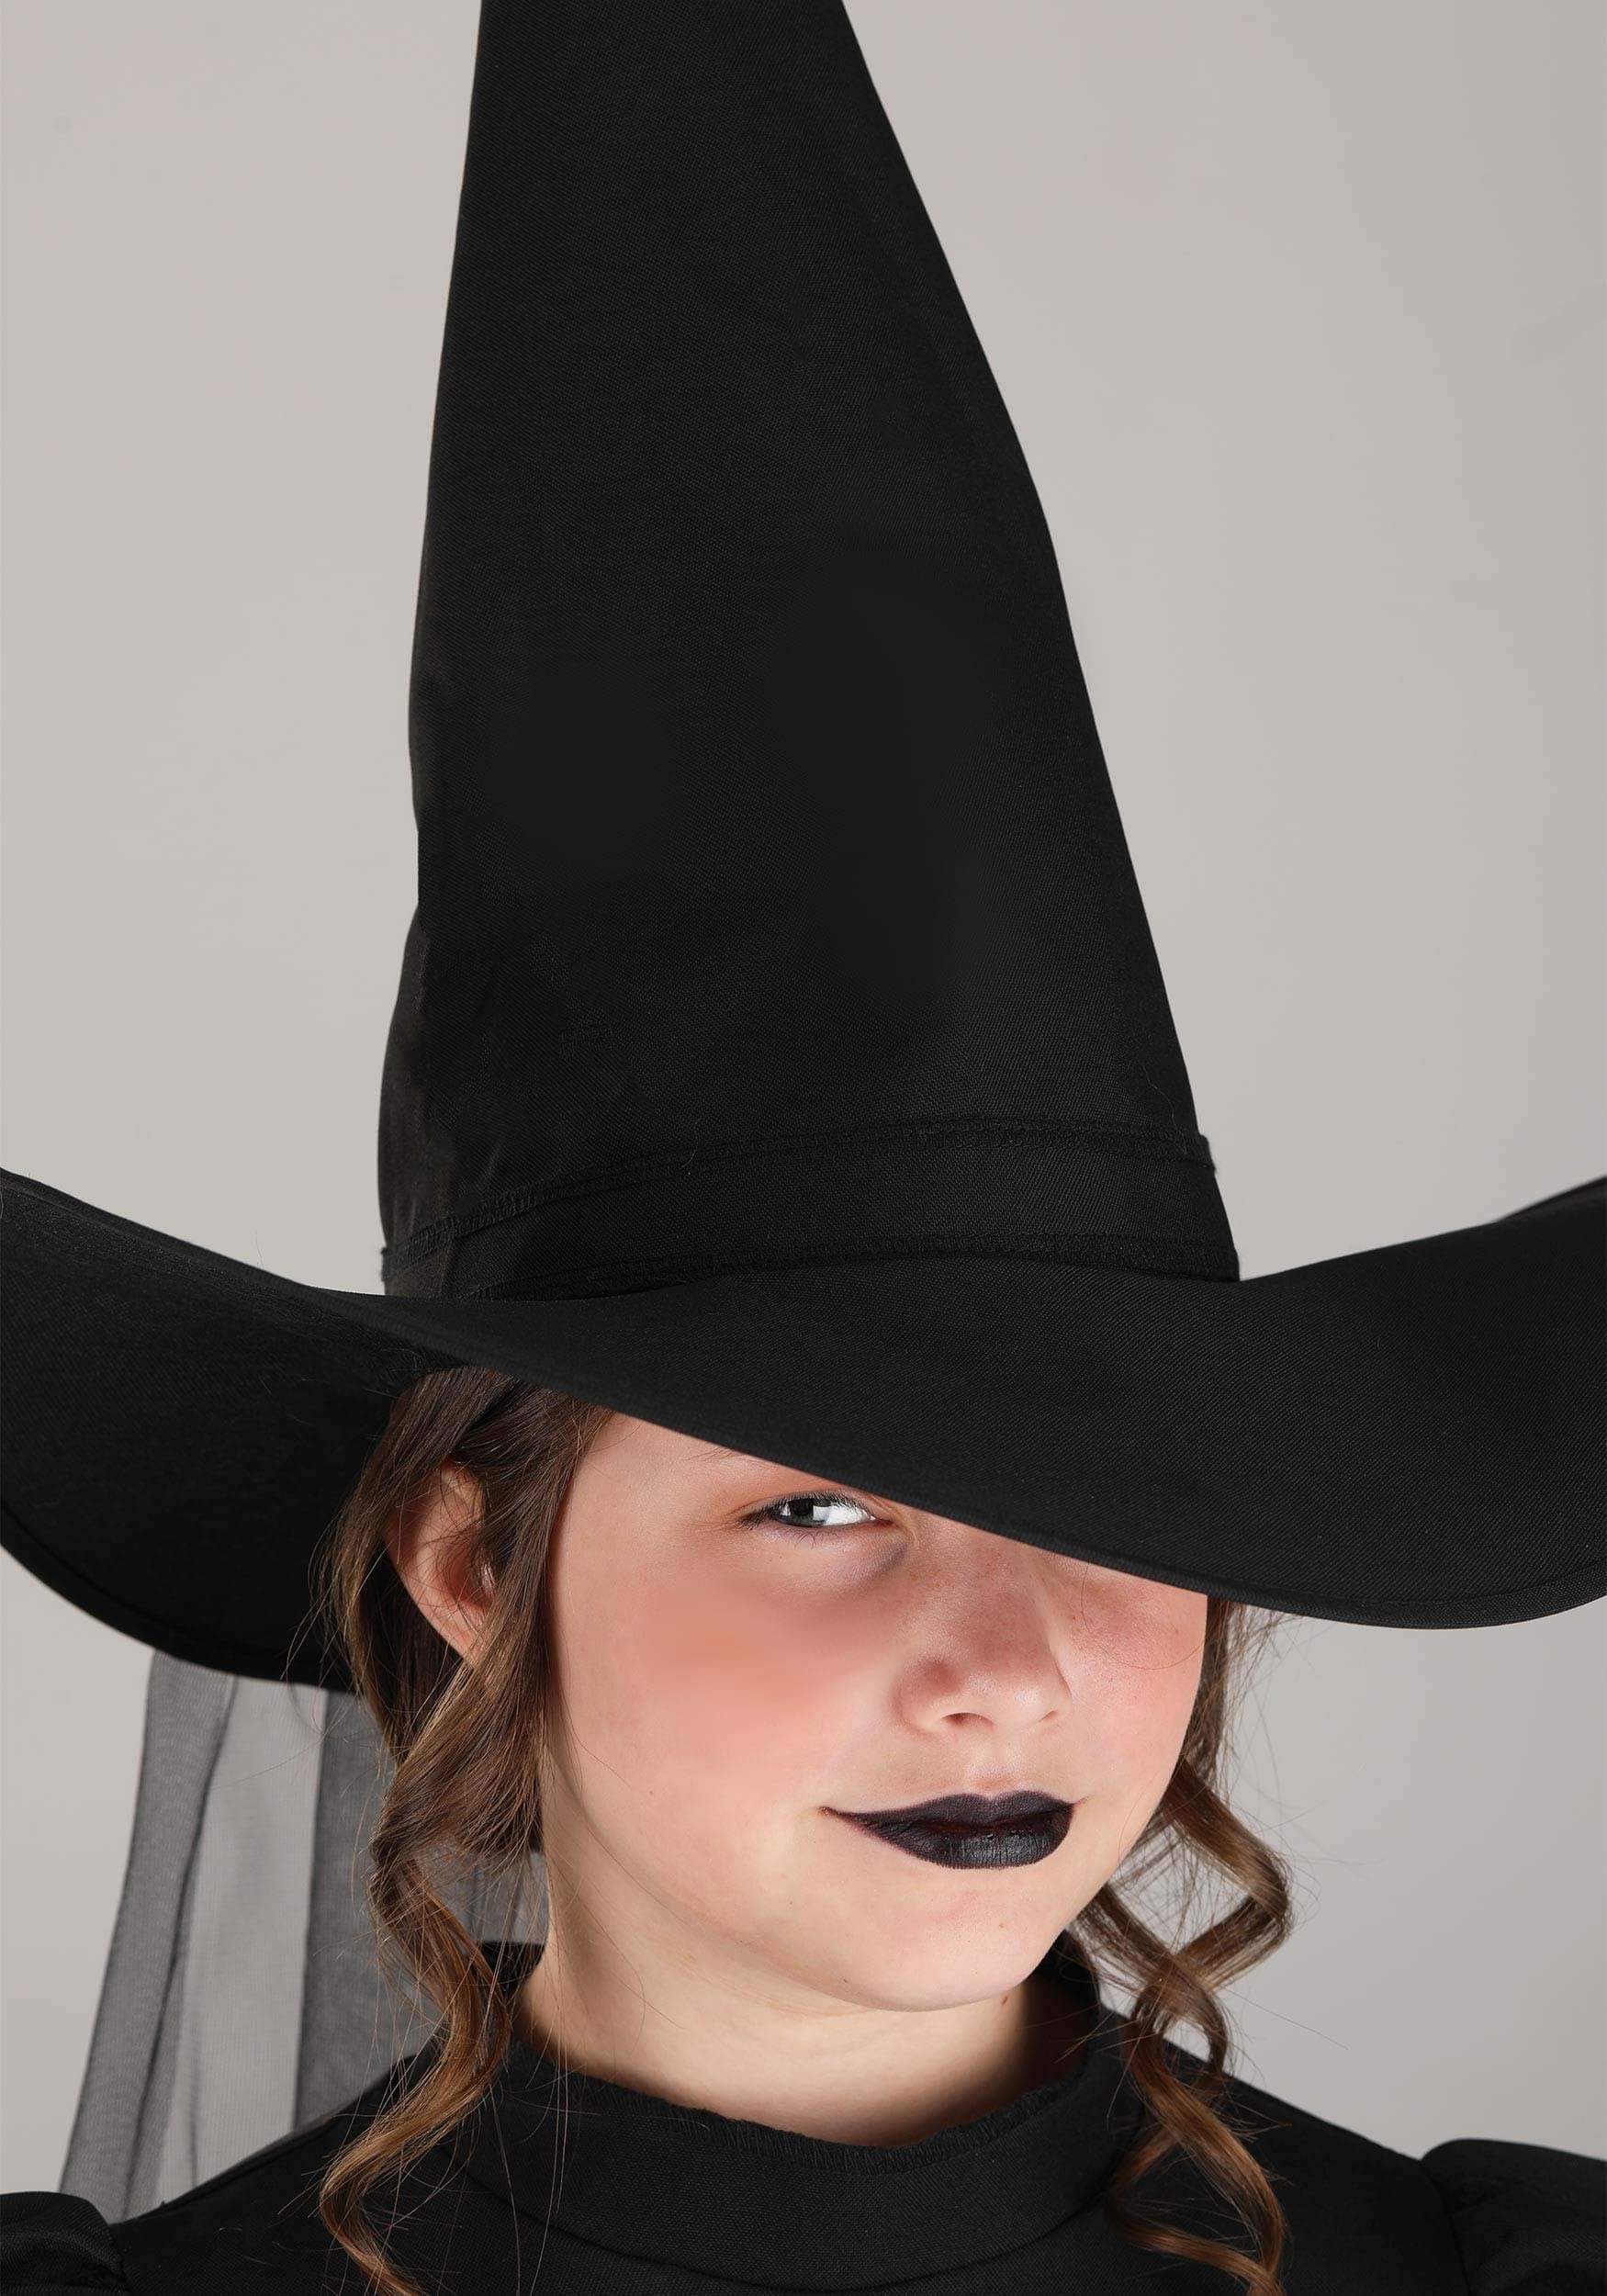 Wizard of Oz Wicked Witch Costume for Girls, Wicked Witch of the West Outfit for Scary Cosplay & Halloween